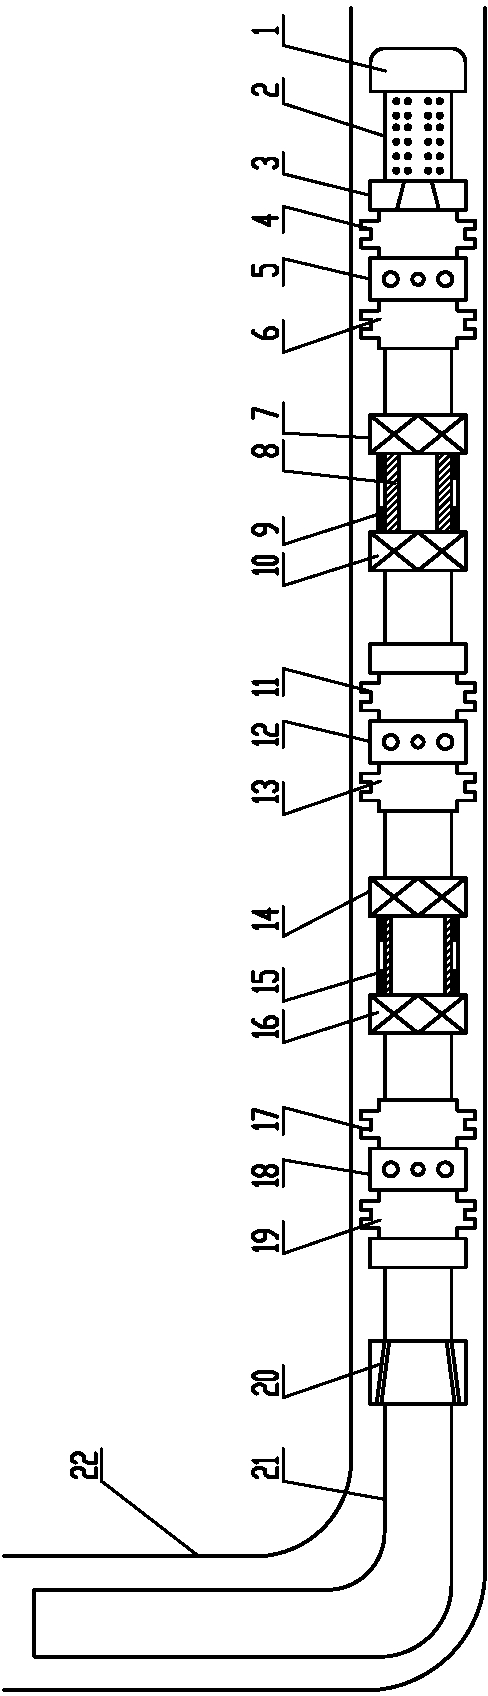 Horizontal well mechanical layering and hydraulic jet fracture acidizing compound technique pipe